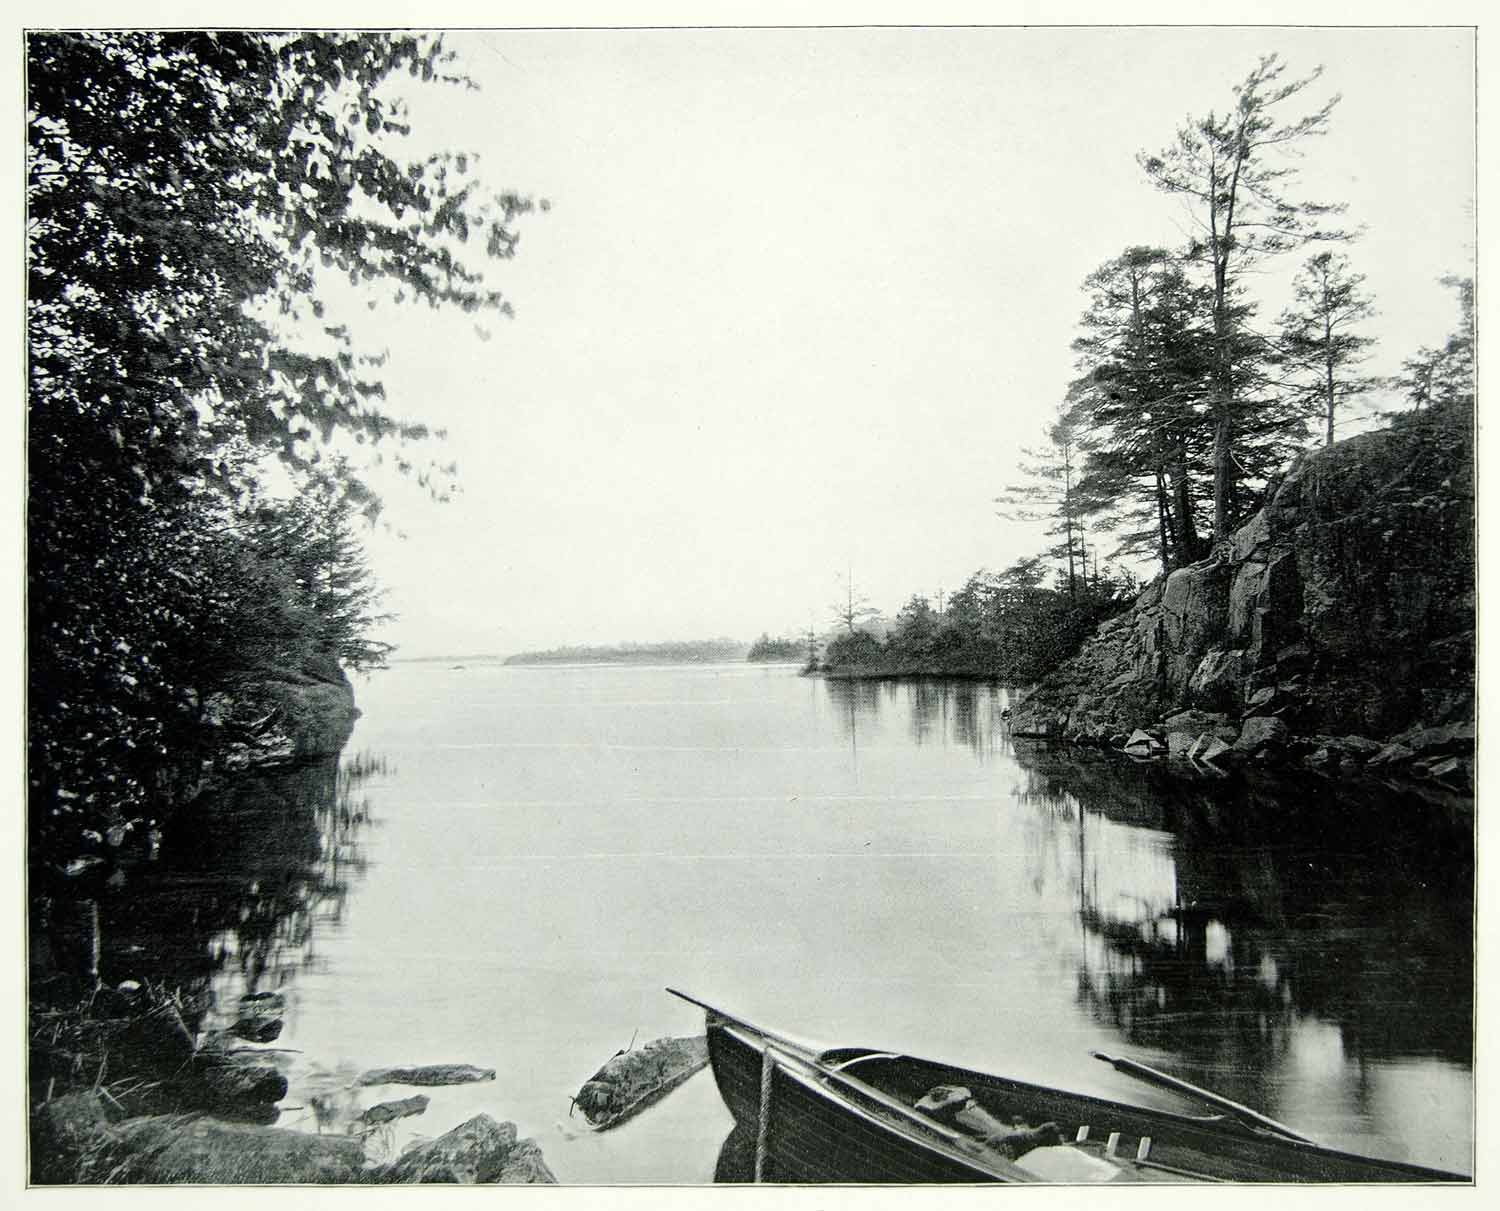 1894 Print Thousand Islands St Lawrence River Canoe Shore Wilderness Scenery AC1